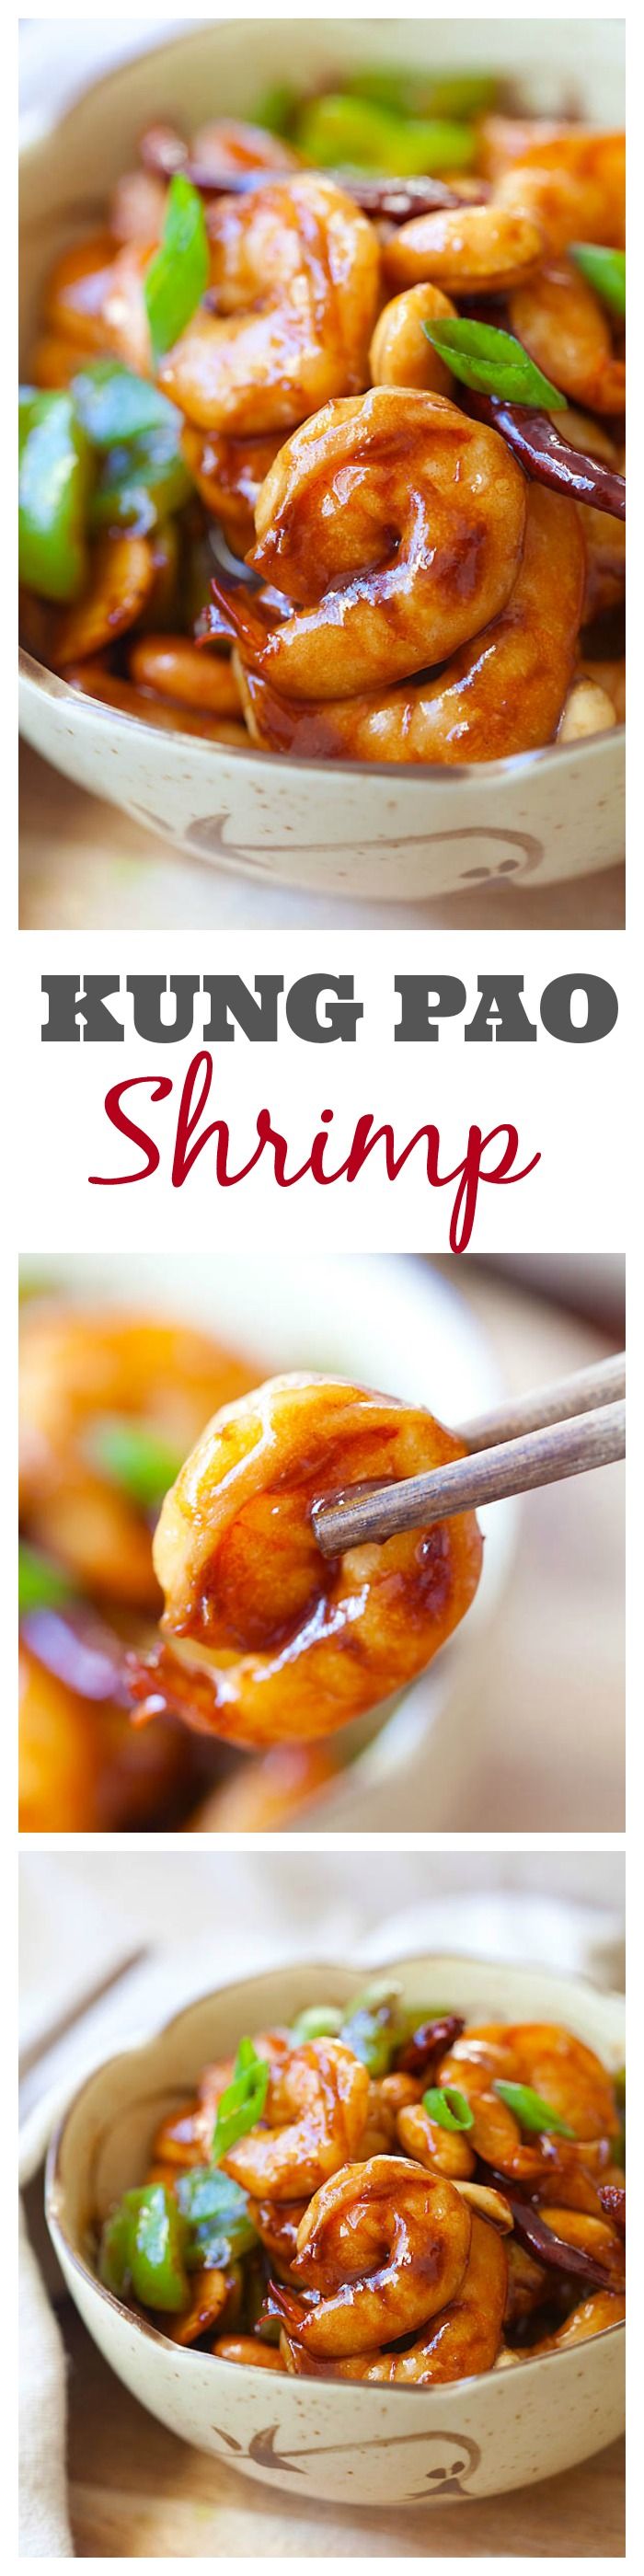 Kung Pao Shrimp recipe that is super easy to make at home in less than 30 minutes but much better and healthier than Kung Pao Shrimp takeout from restaurants | rasamalaysia.com